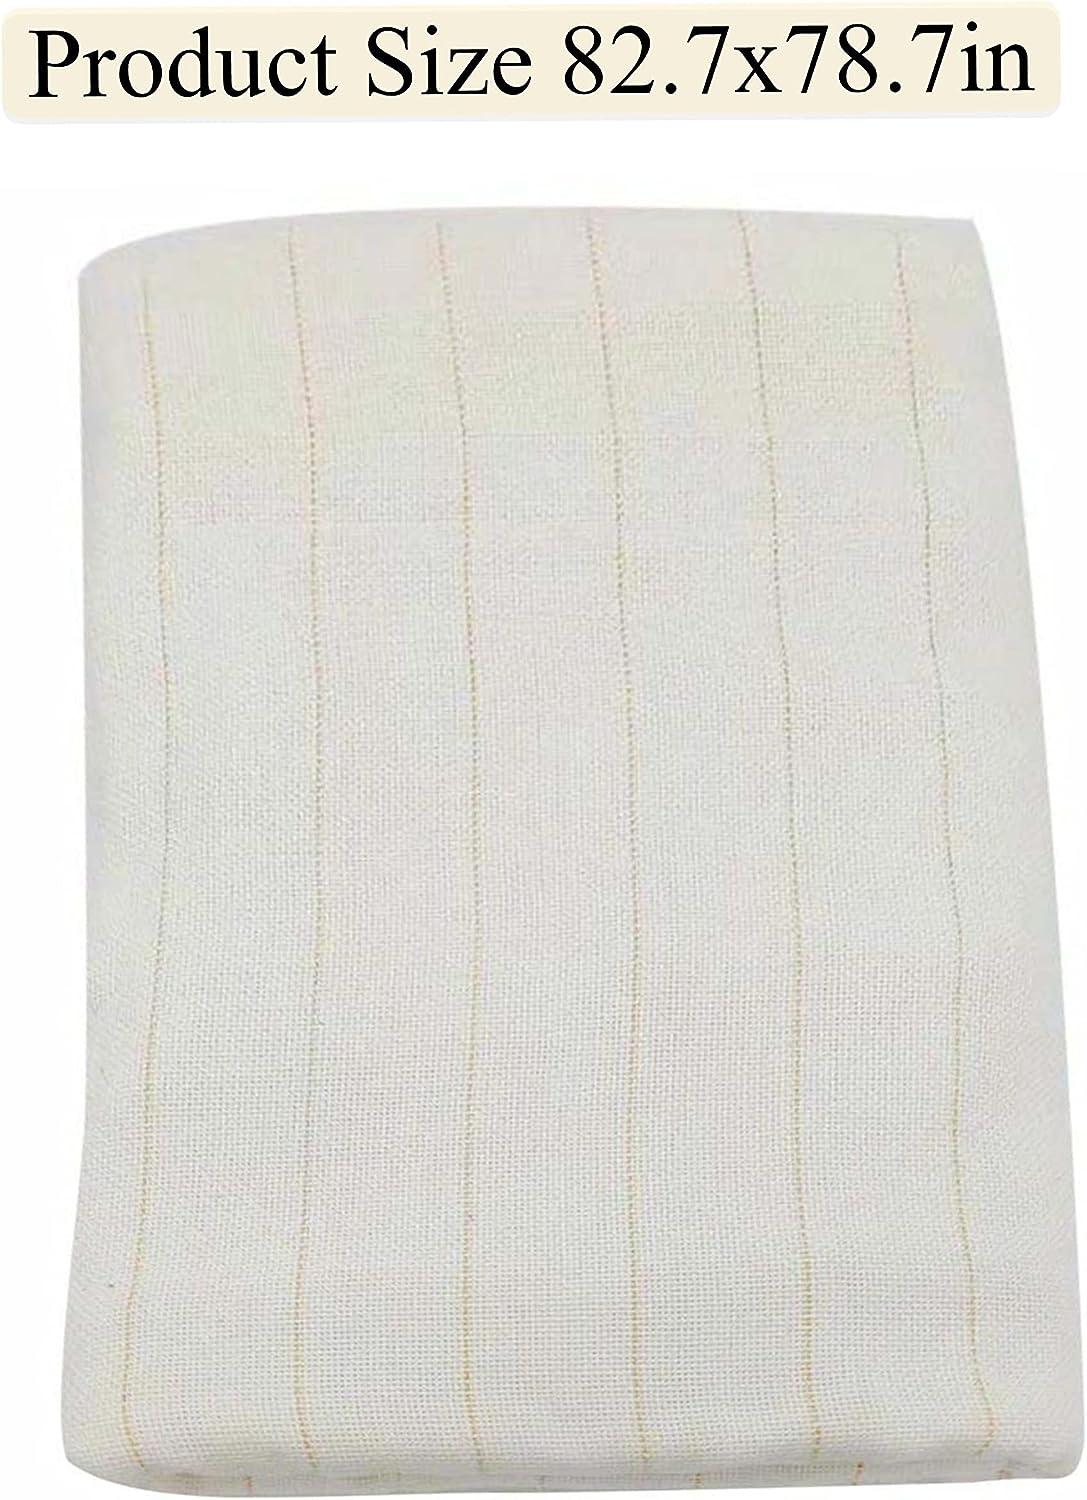  Tufting Cloth 85 × 79, Riiai Primary Tufting Cloth Durable  and Stretches Well On The Frame, Monk Cloth with Mark Lines and Sewn Edges,  Perfect for Rug Tufting Gun and Rug